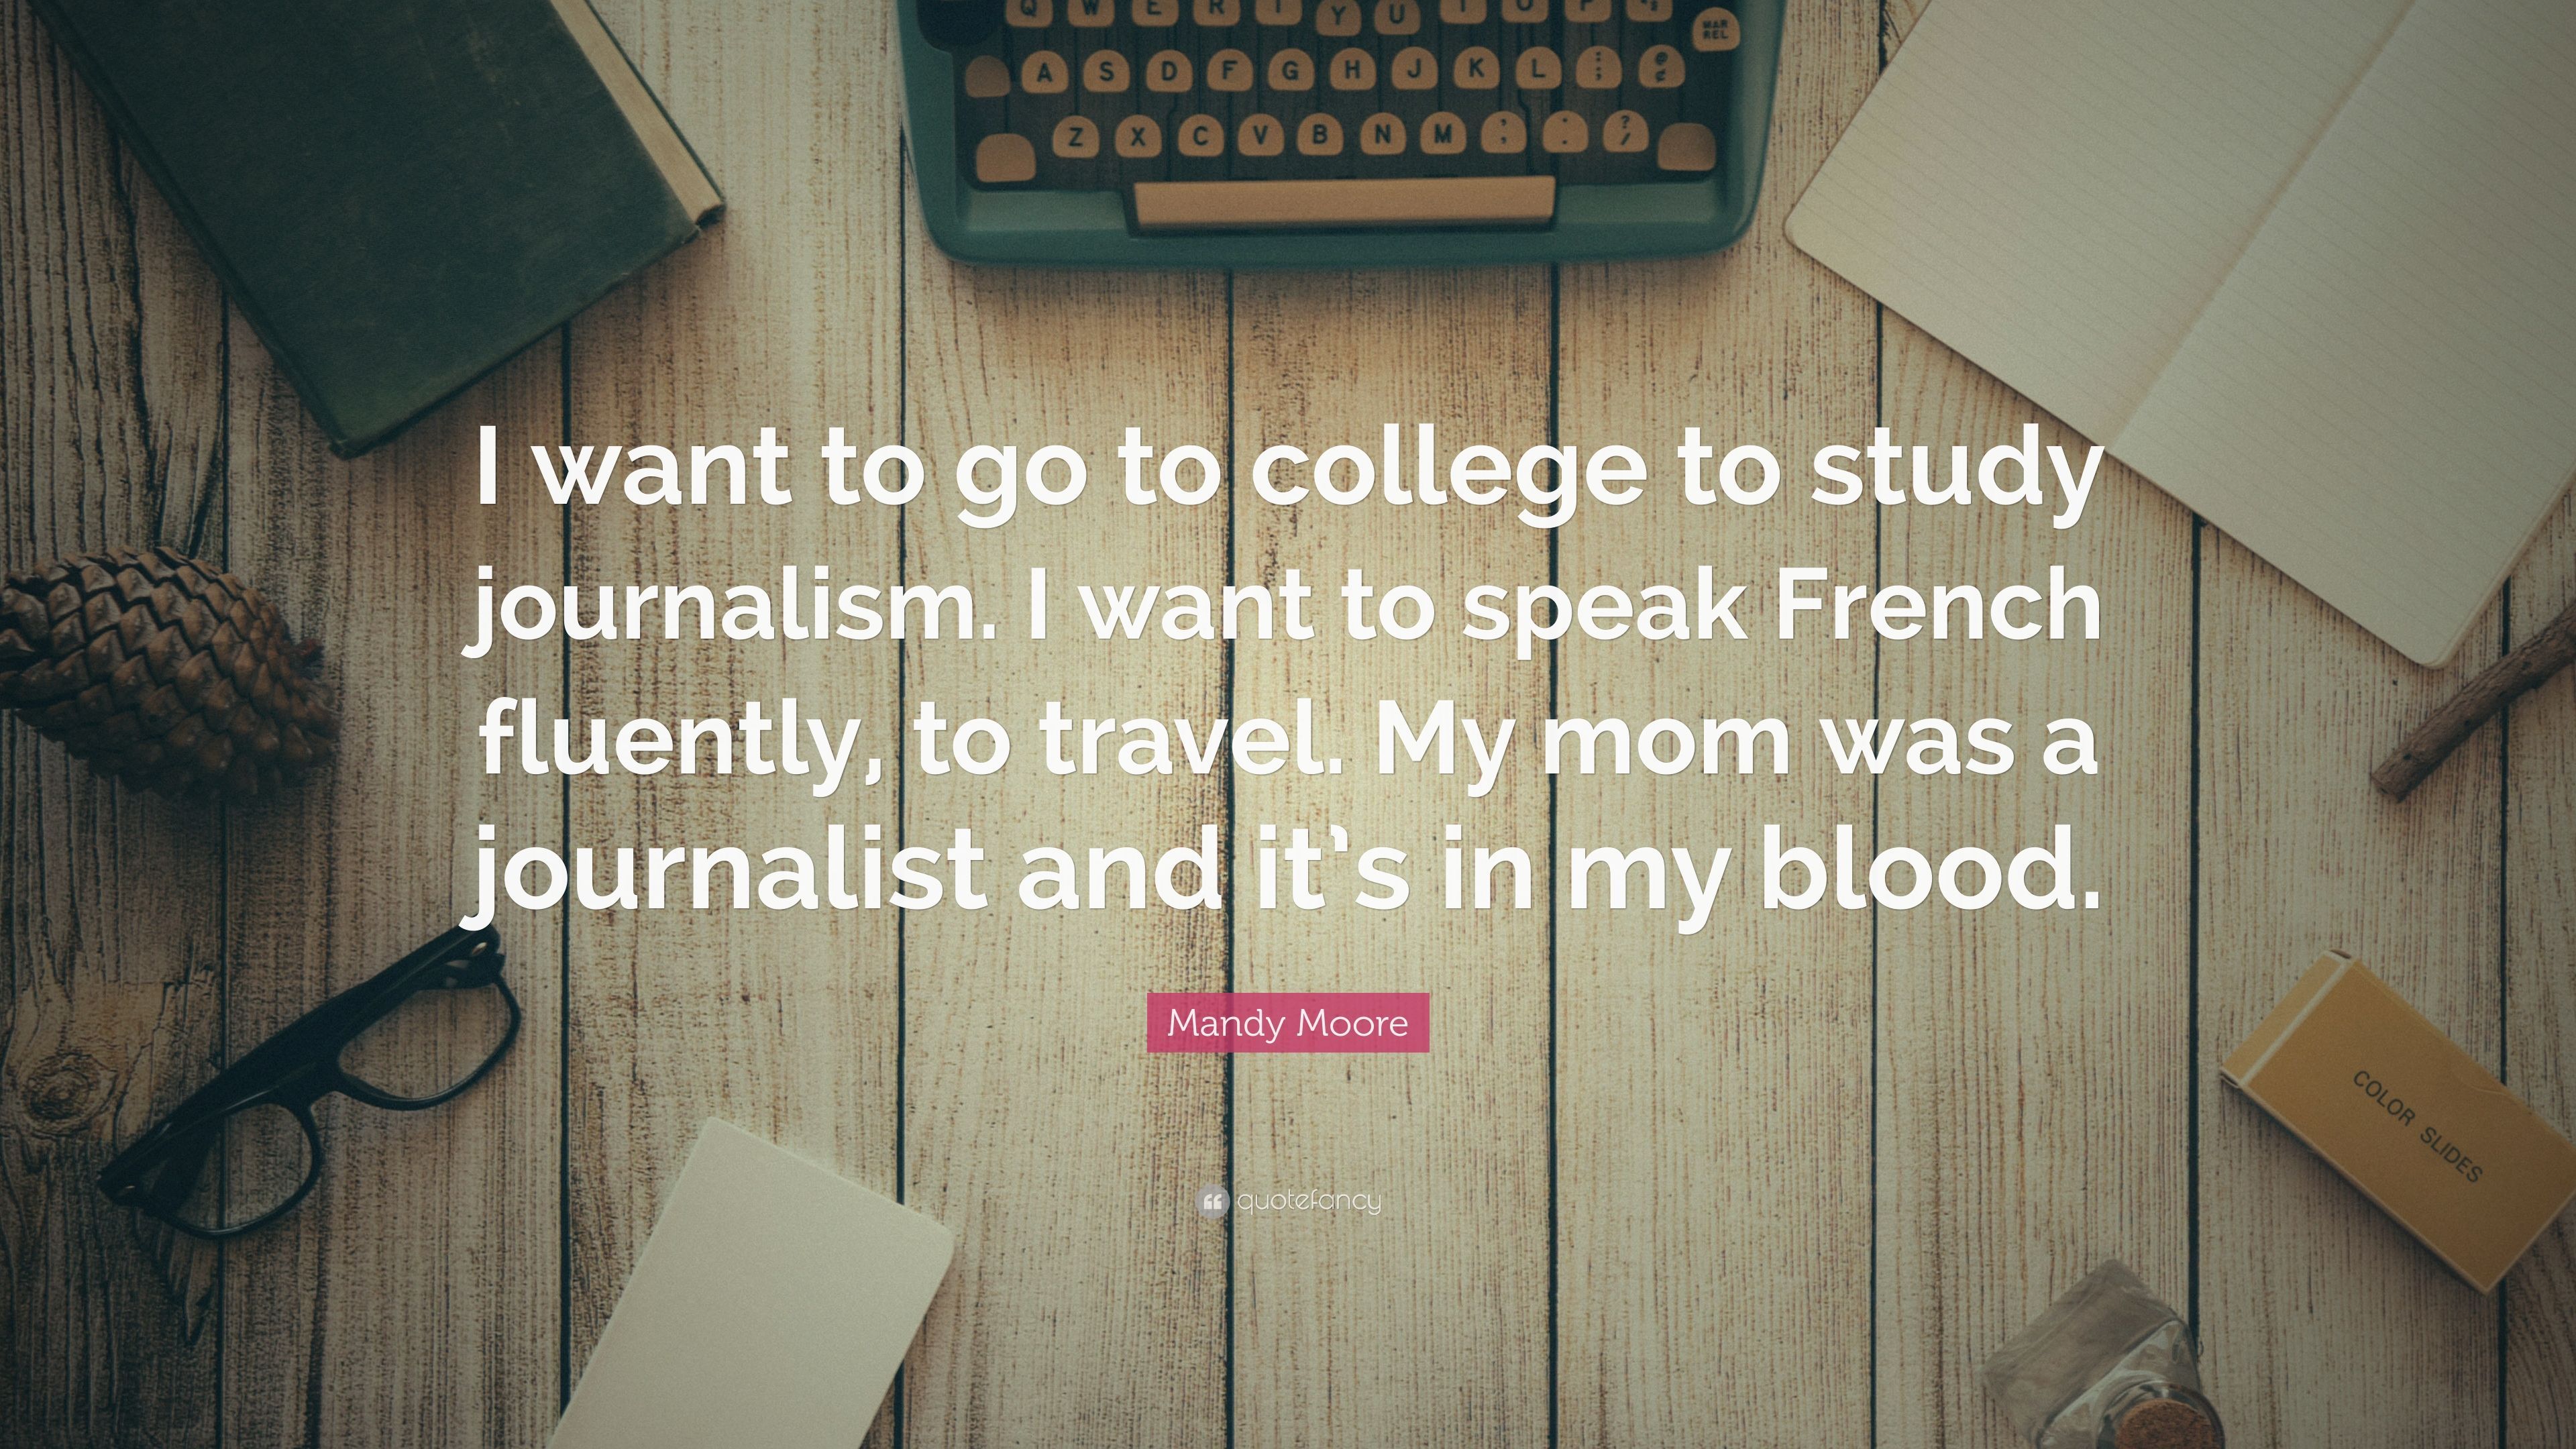 Mandy Moore Quote: "I want to go to college to study journalism. 